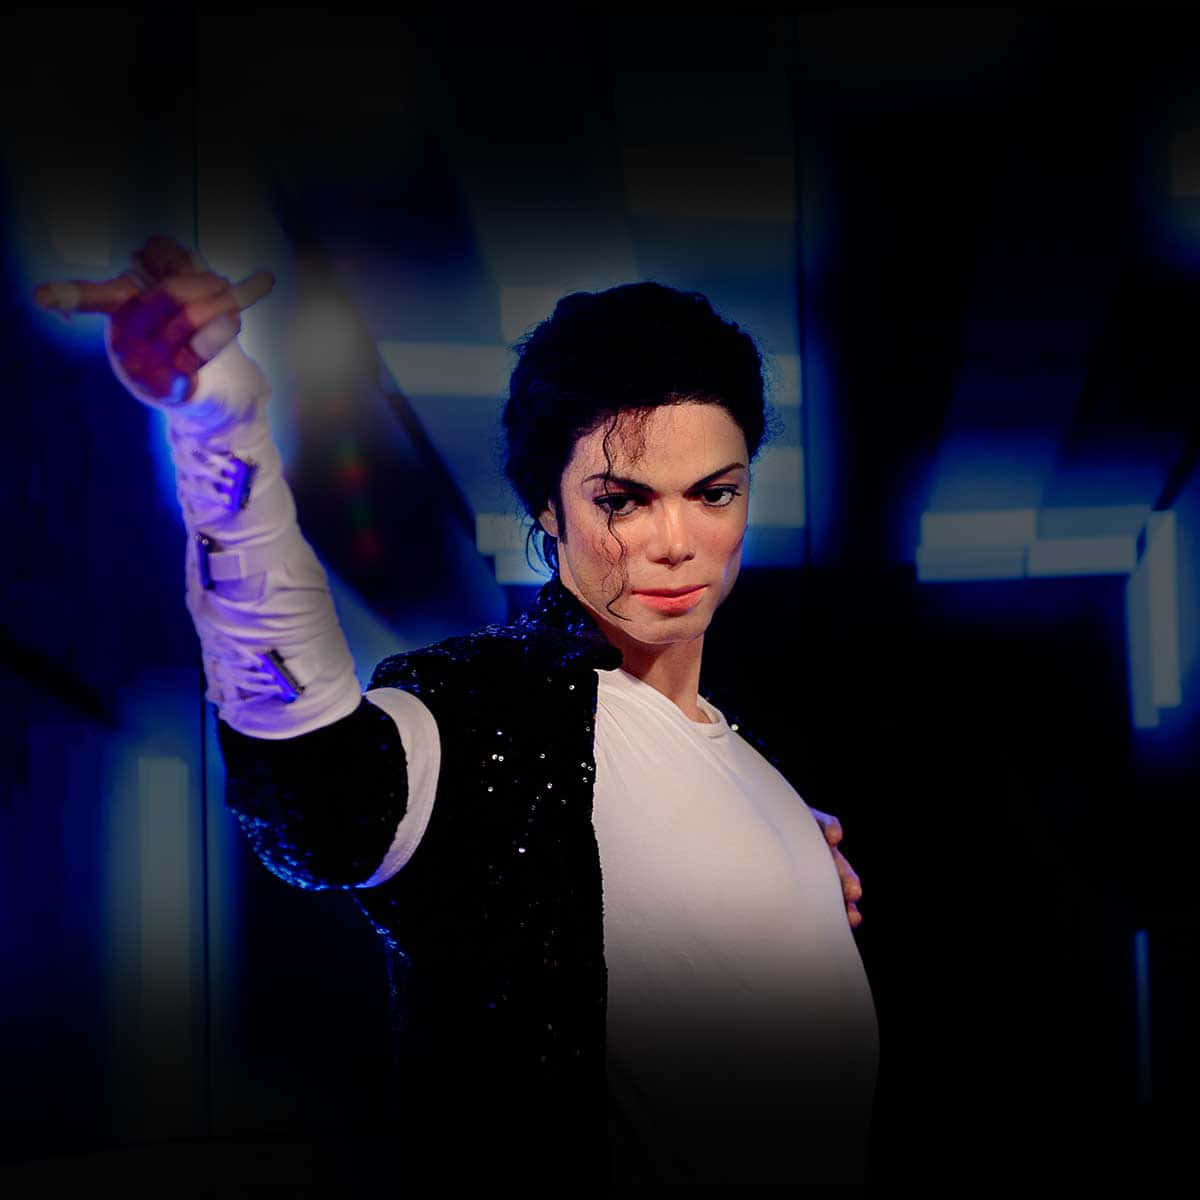 "This is Michael Jackson, the King of Pop!"